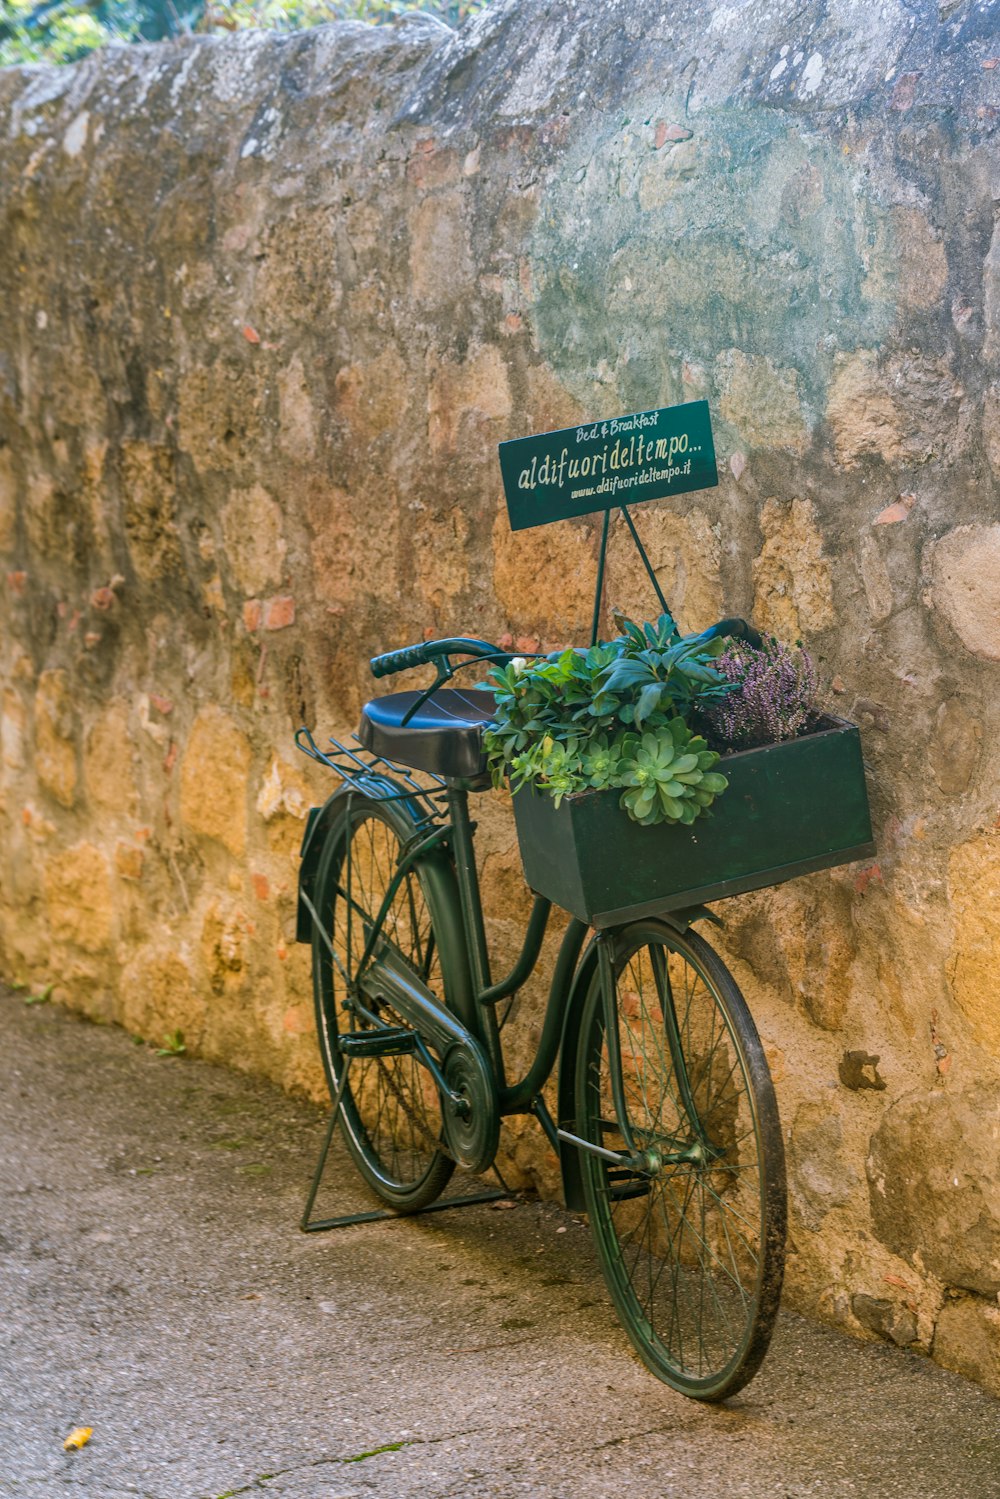 a bicycle with a planter attached to it